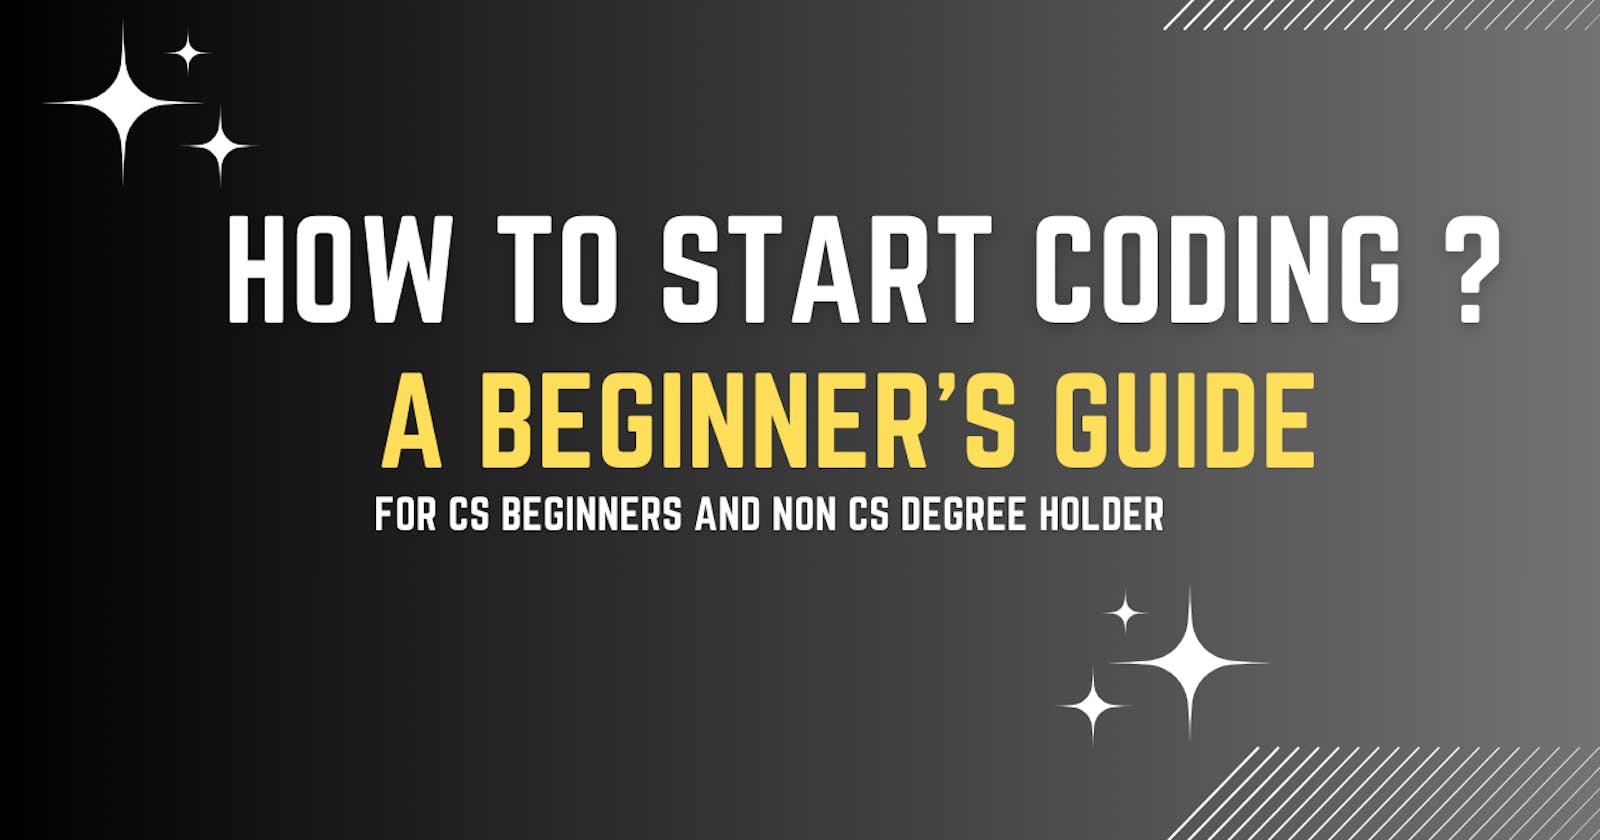 A Beginner's Guide: How to Start Coding